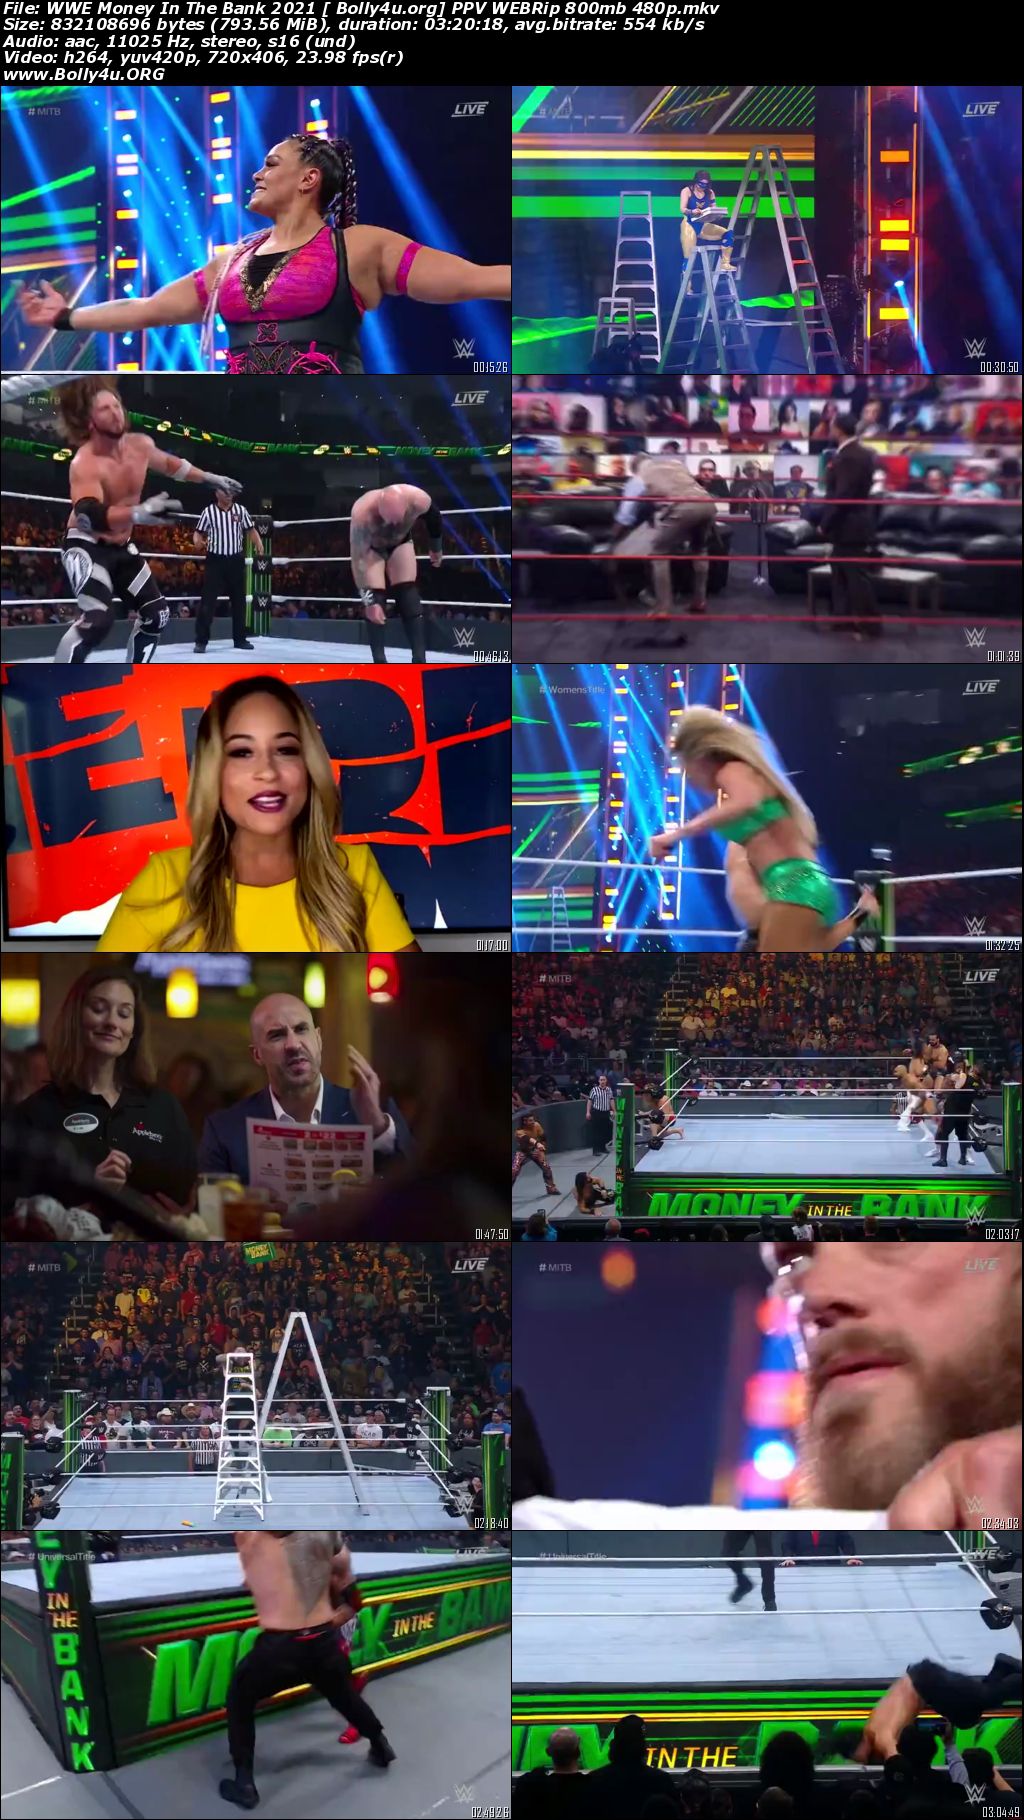 WWE Money In The Bank 2021 PPV WEBRip 800mb 480p Download